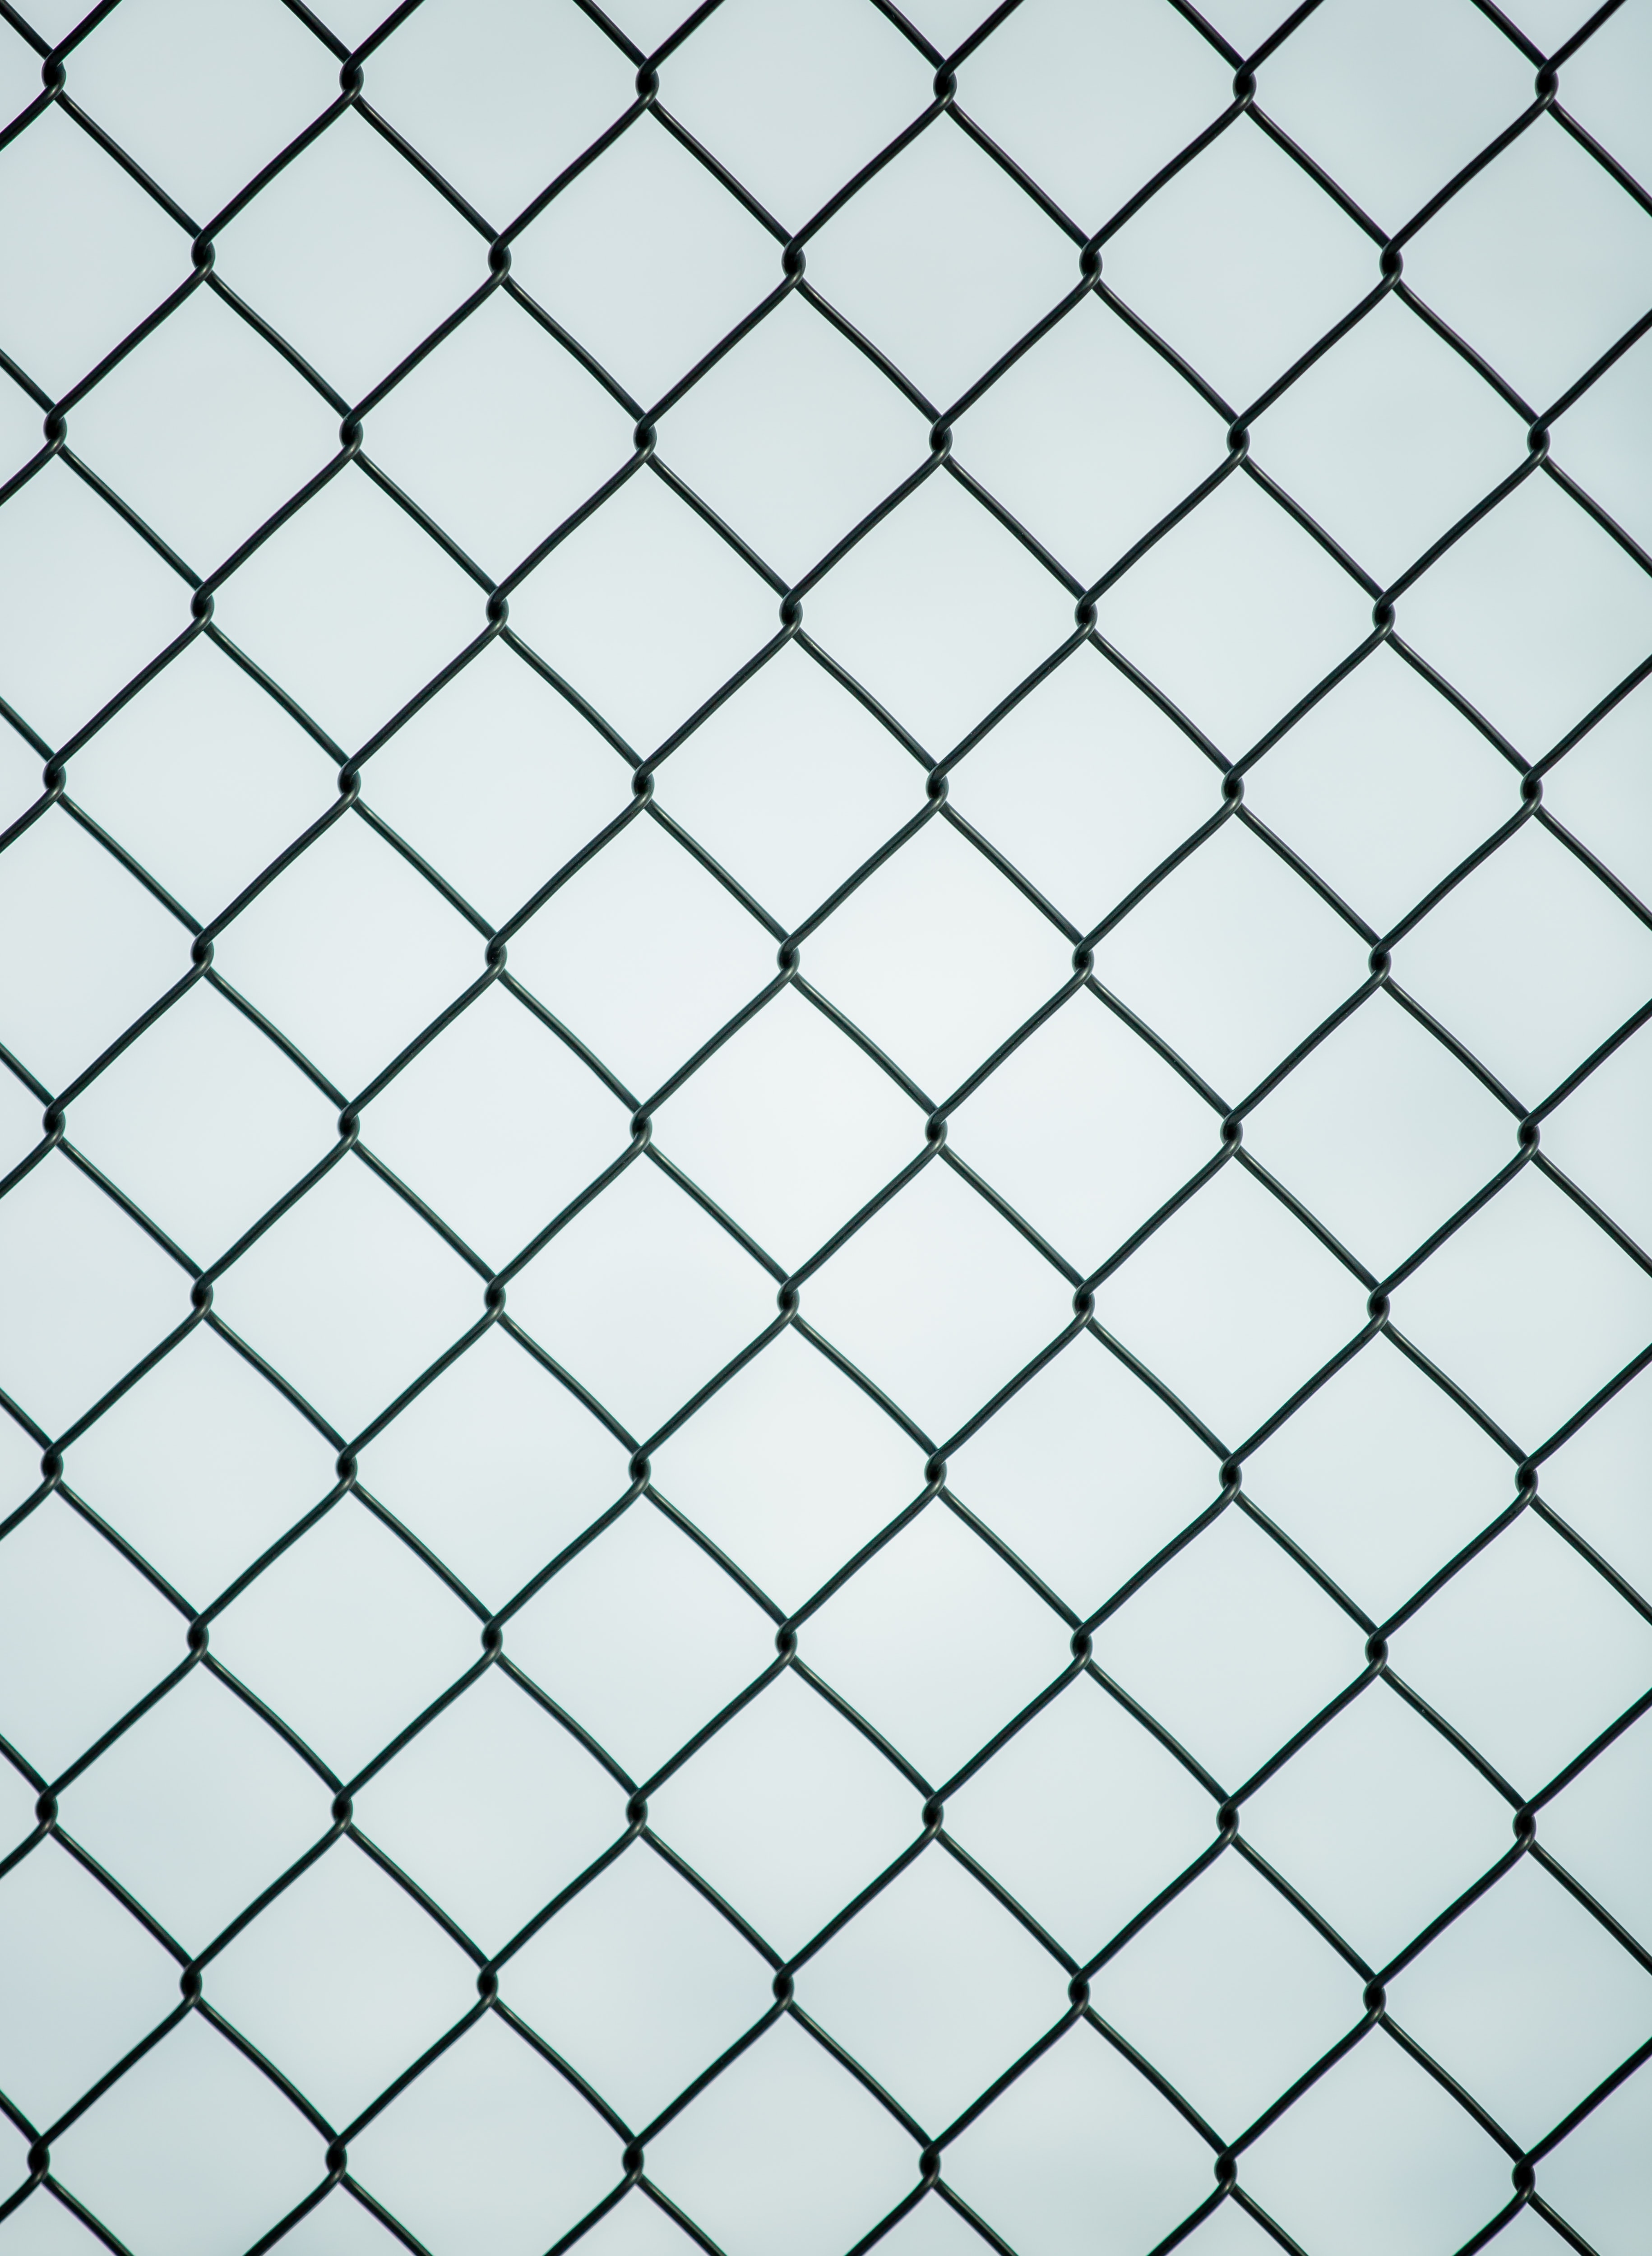 141884 download wallpaper grid, minimalism, fence, lattice, trellis screensavers and pictures for free